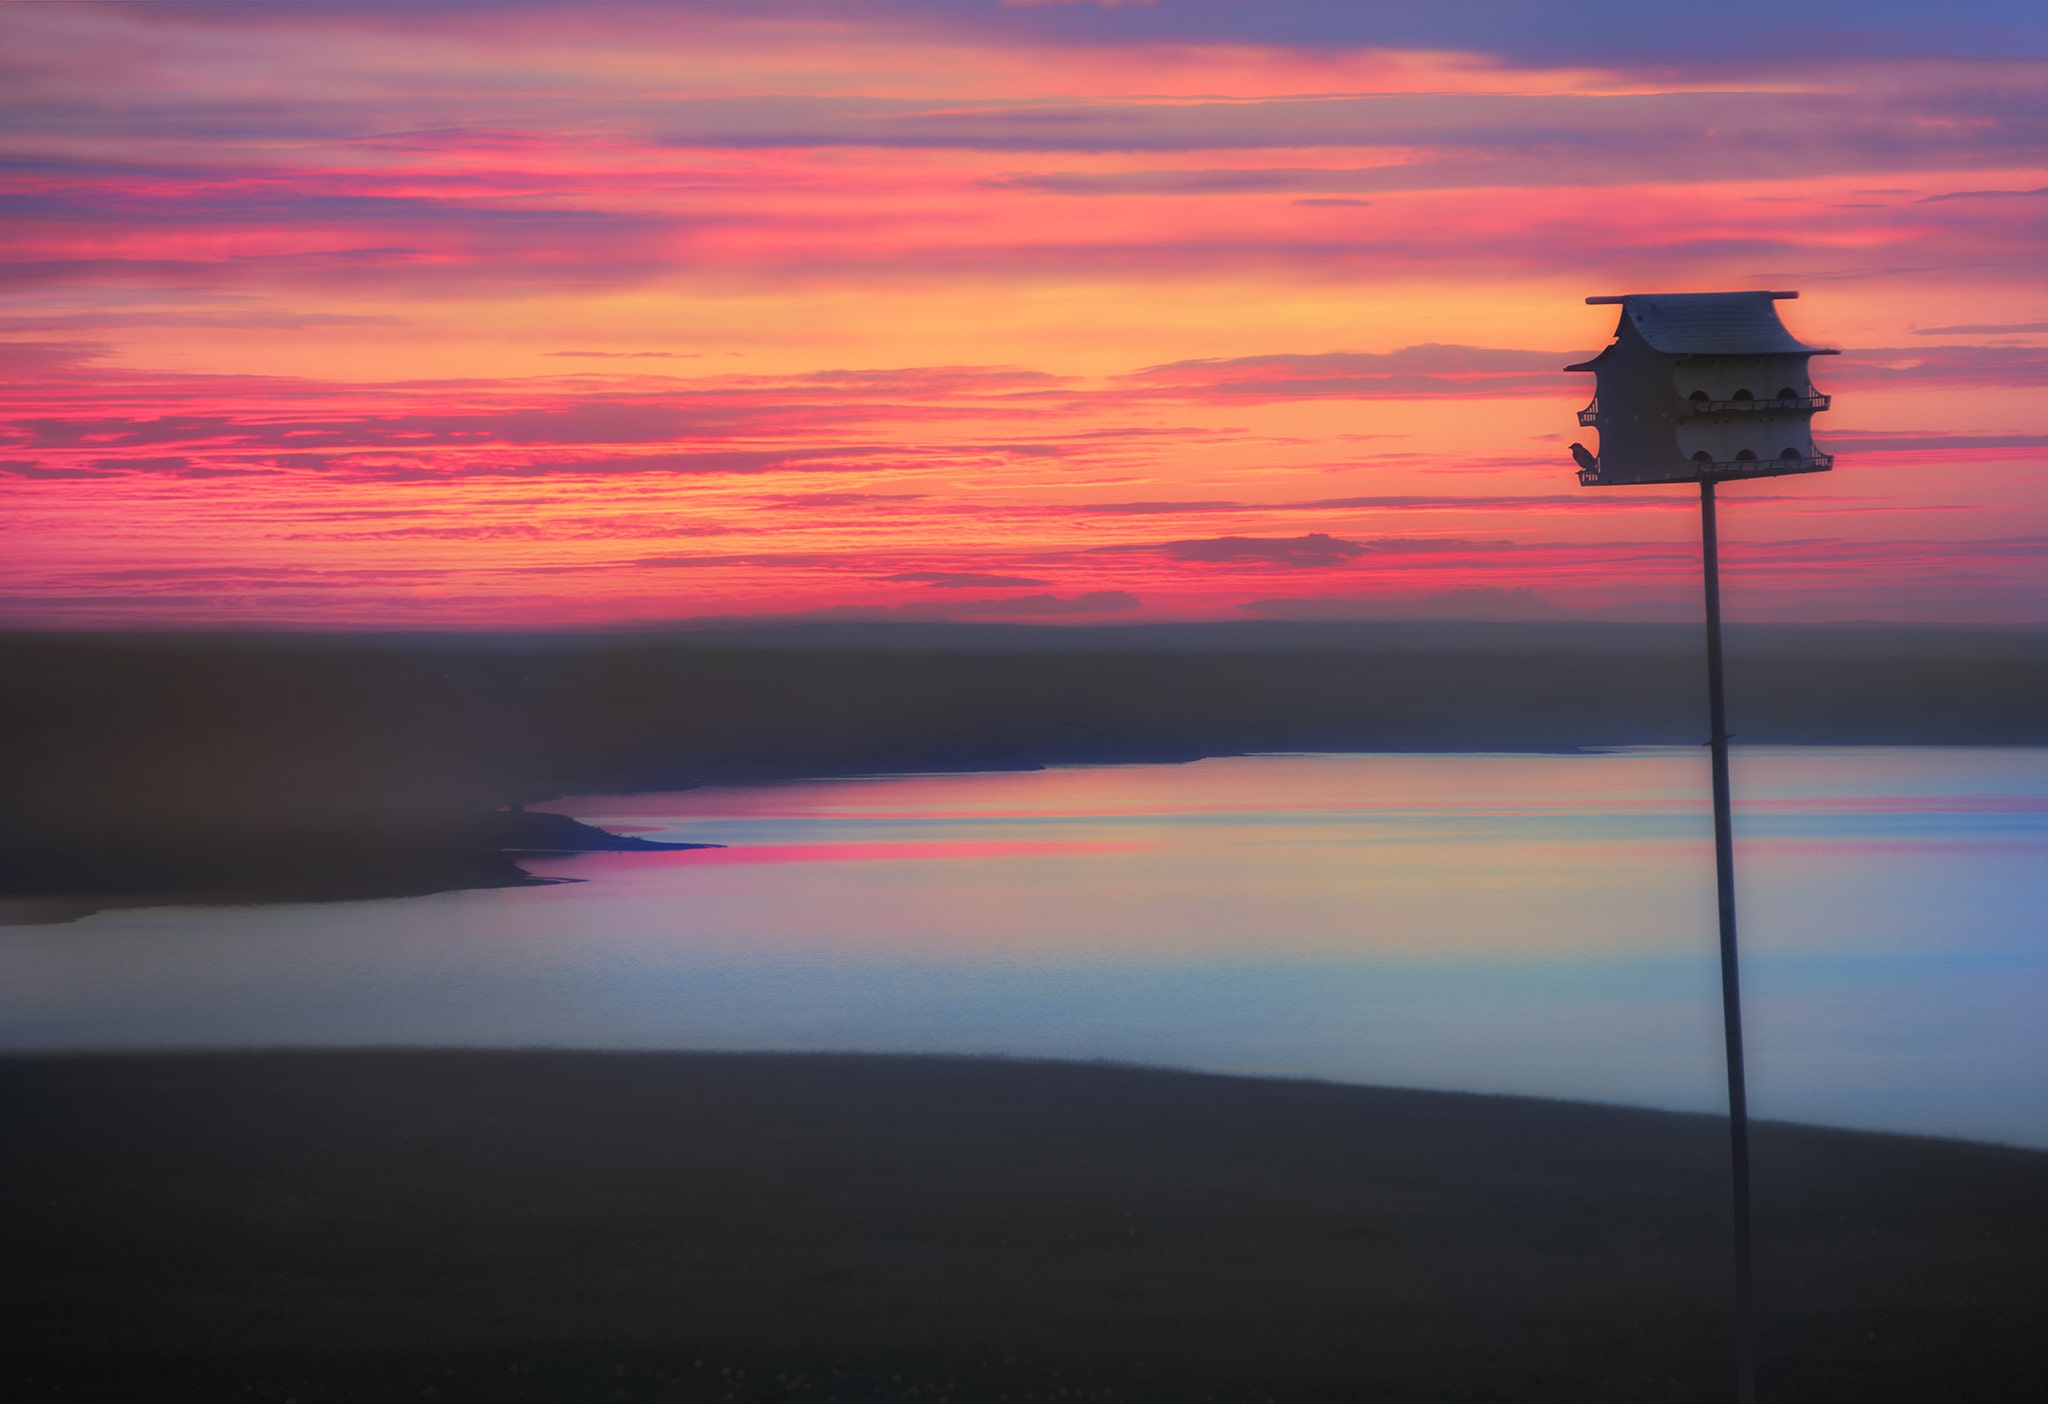 Colorful sunset and birdhouse picture